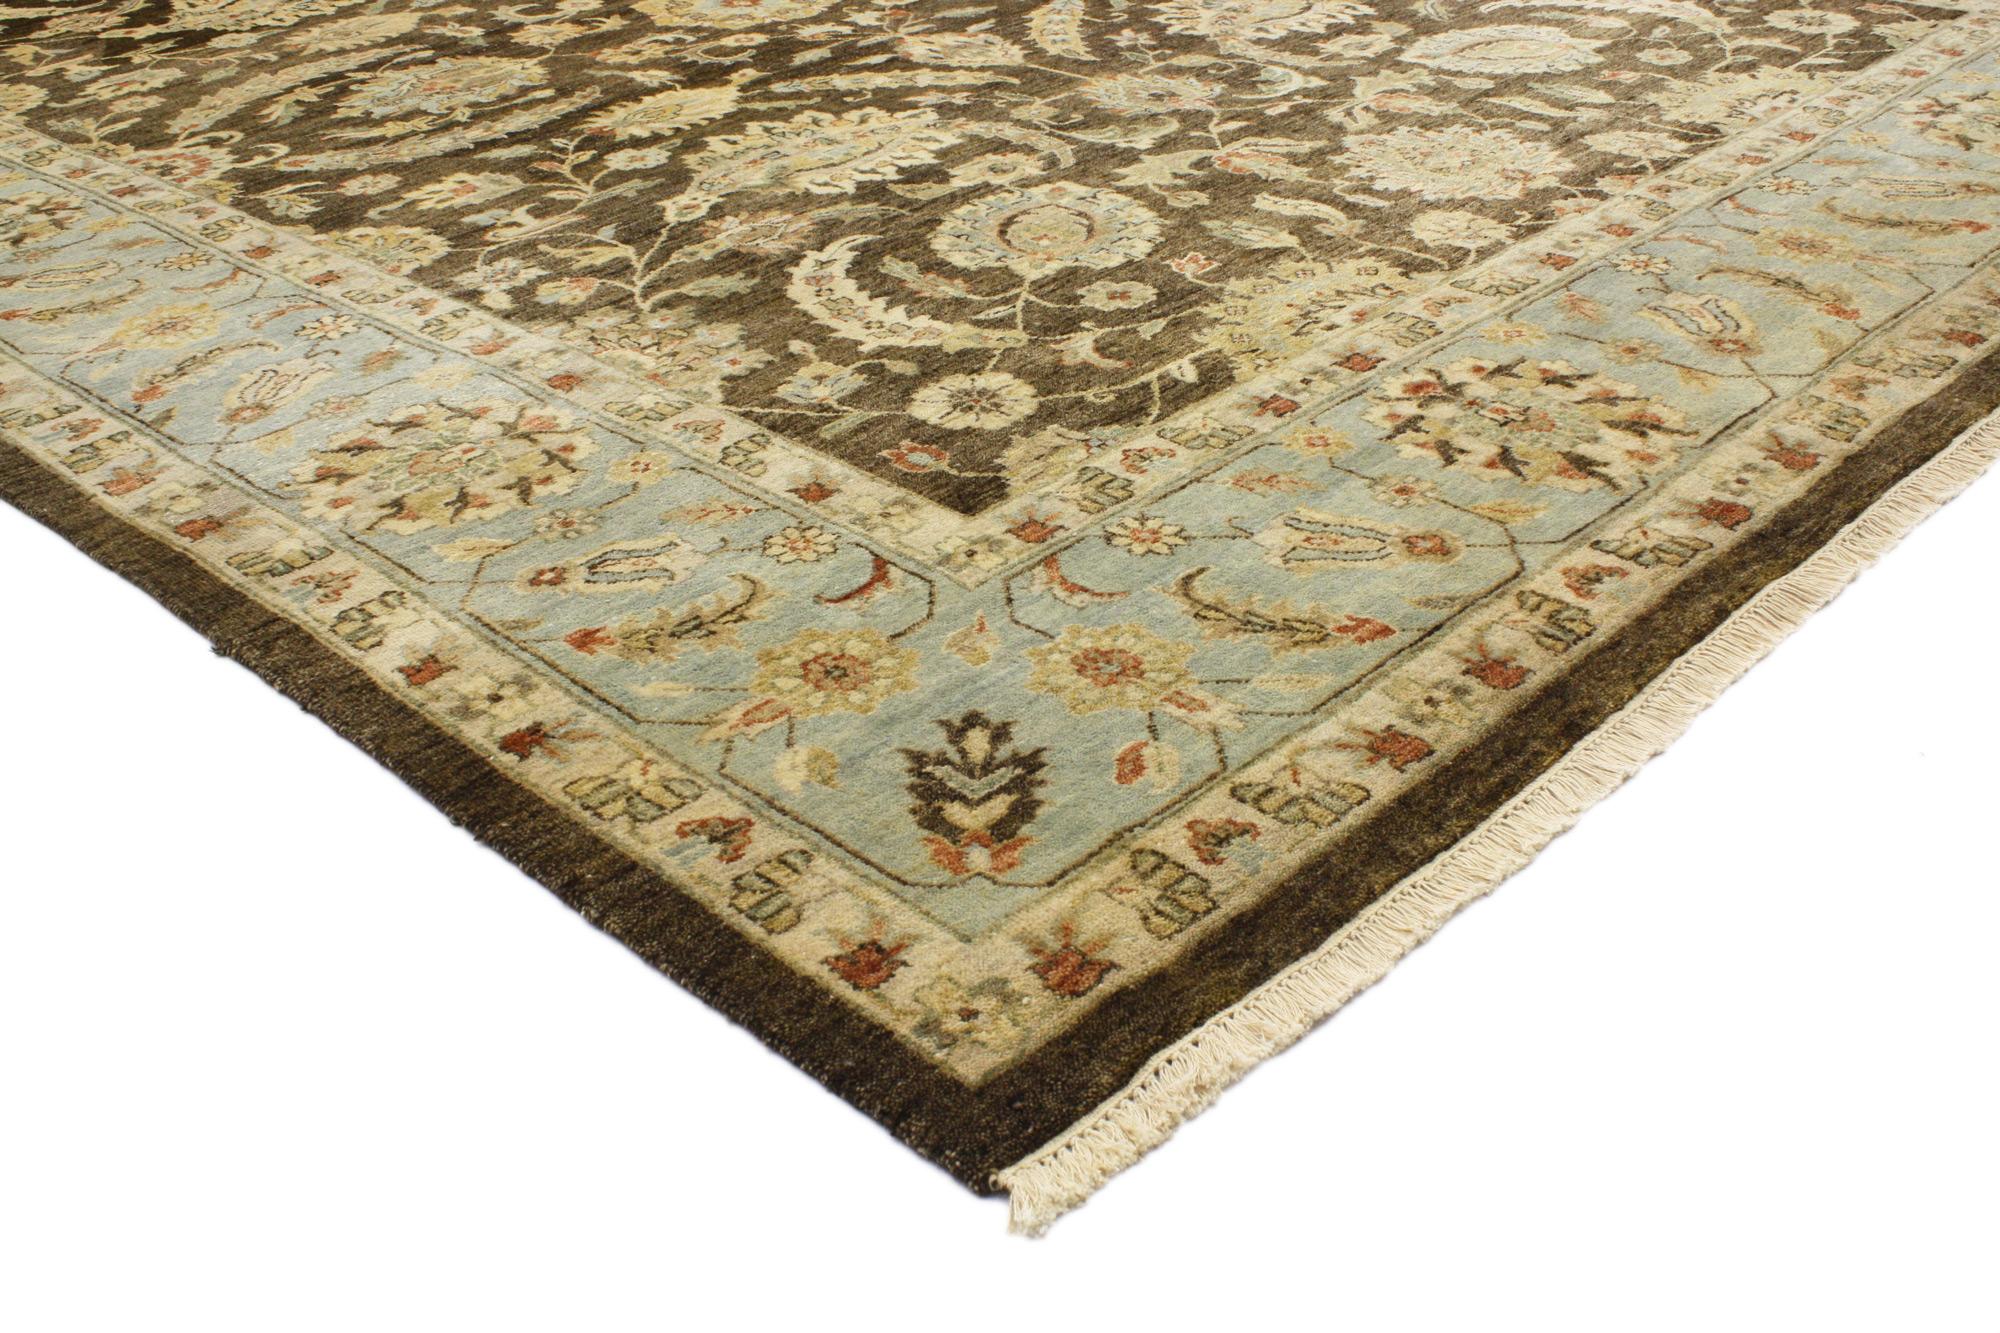 76772 Vintage Oushak Rug From Pakistan, 08'10 x 12'02. 
Warm and inviting with incredible detail and texture, this hand knotted wool vintage-inspired Oushak rug is a captivating vision of woven beauty. The intricate botanical design and earthy